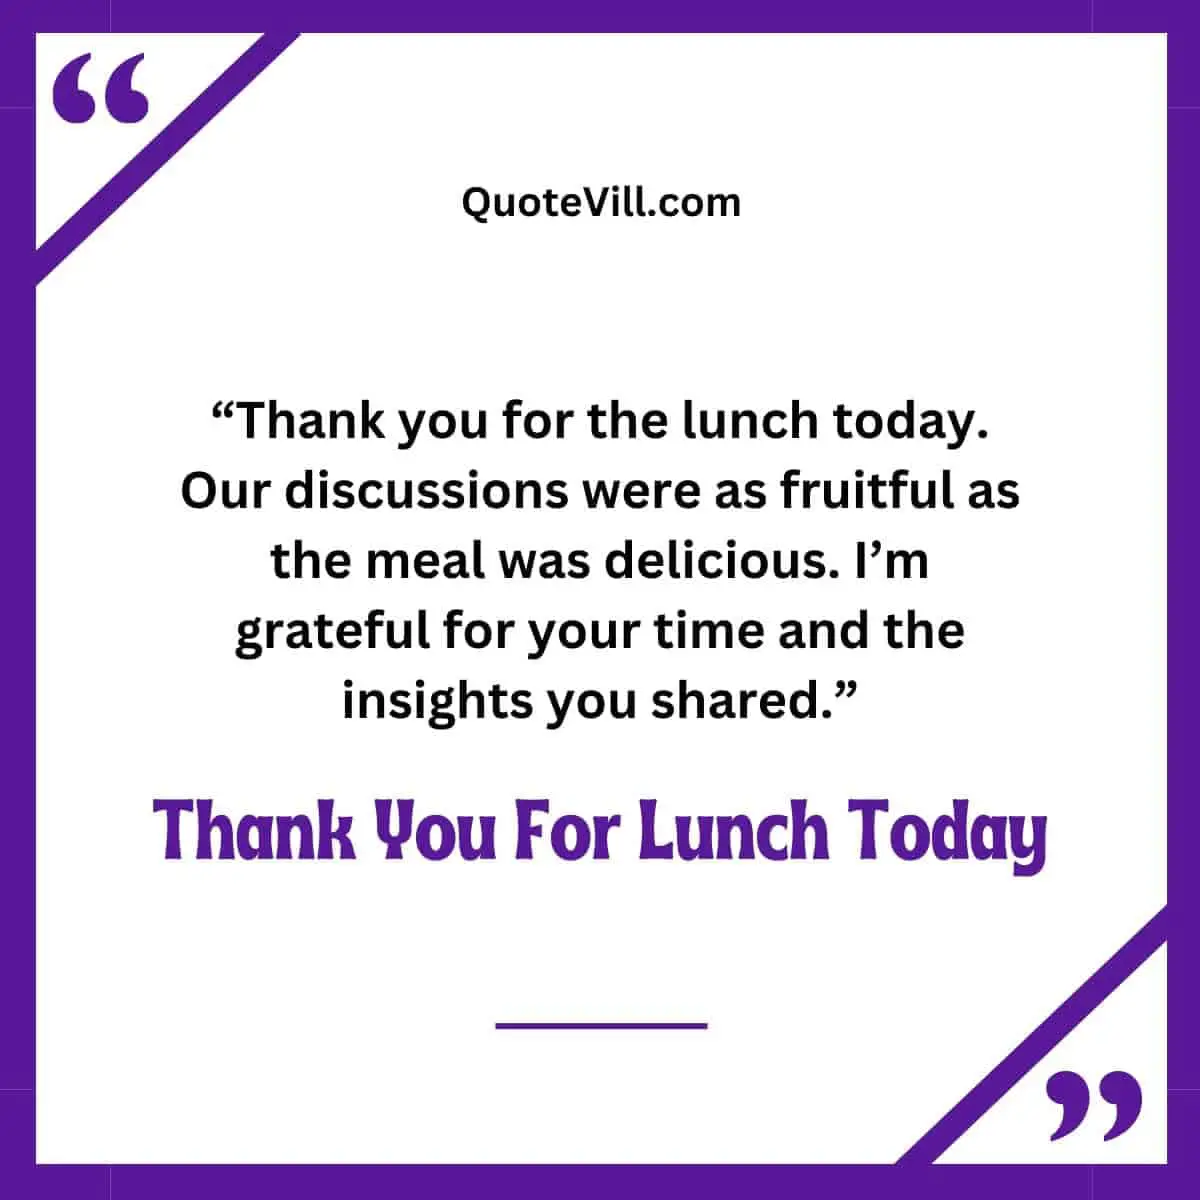 Saying Thank You For a Business Lunch